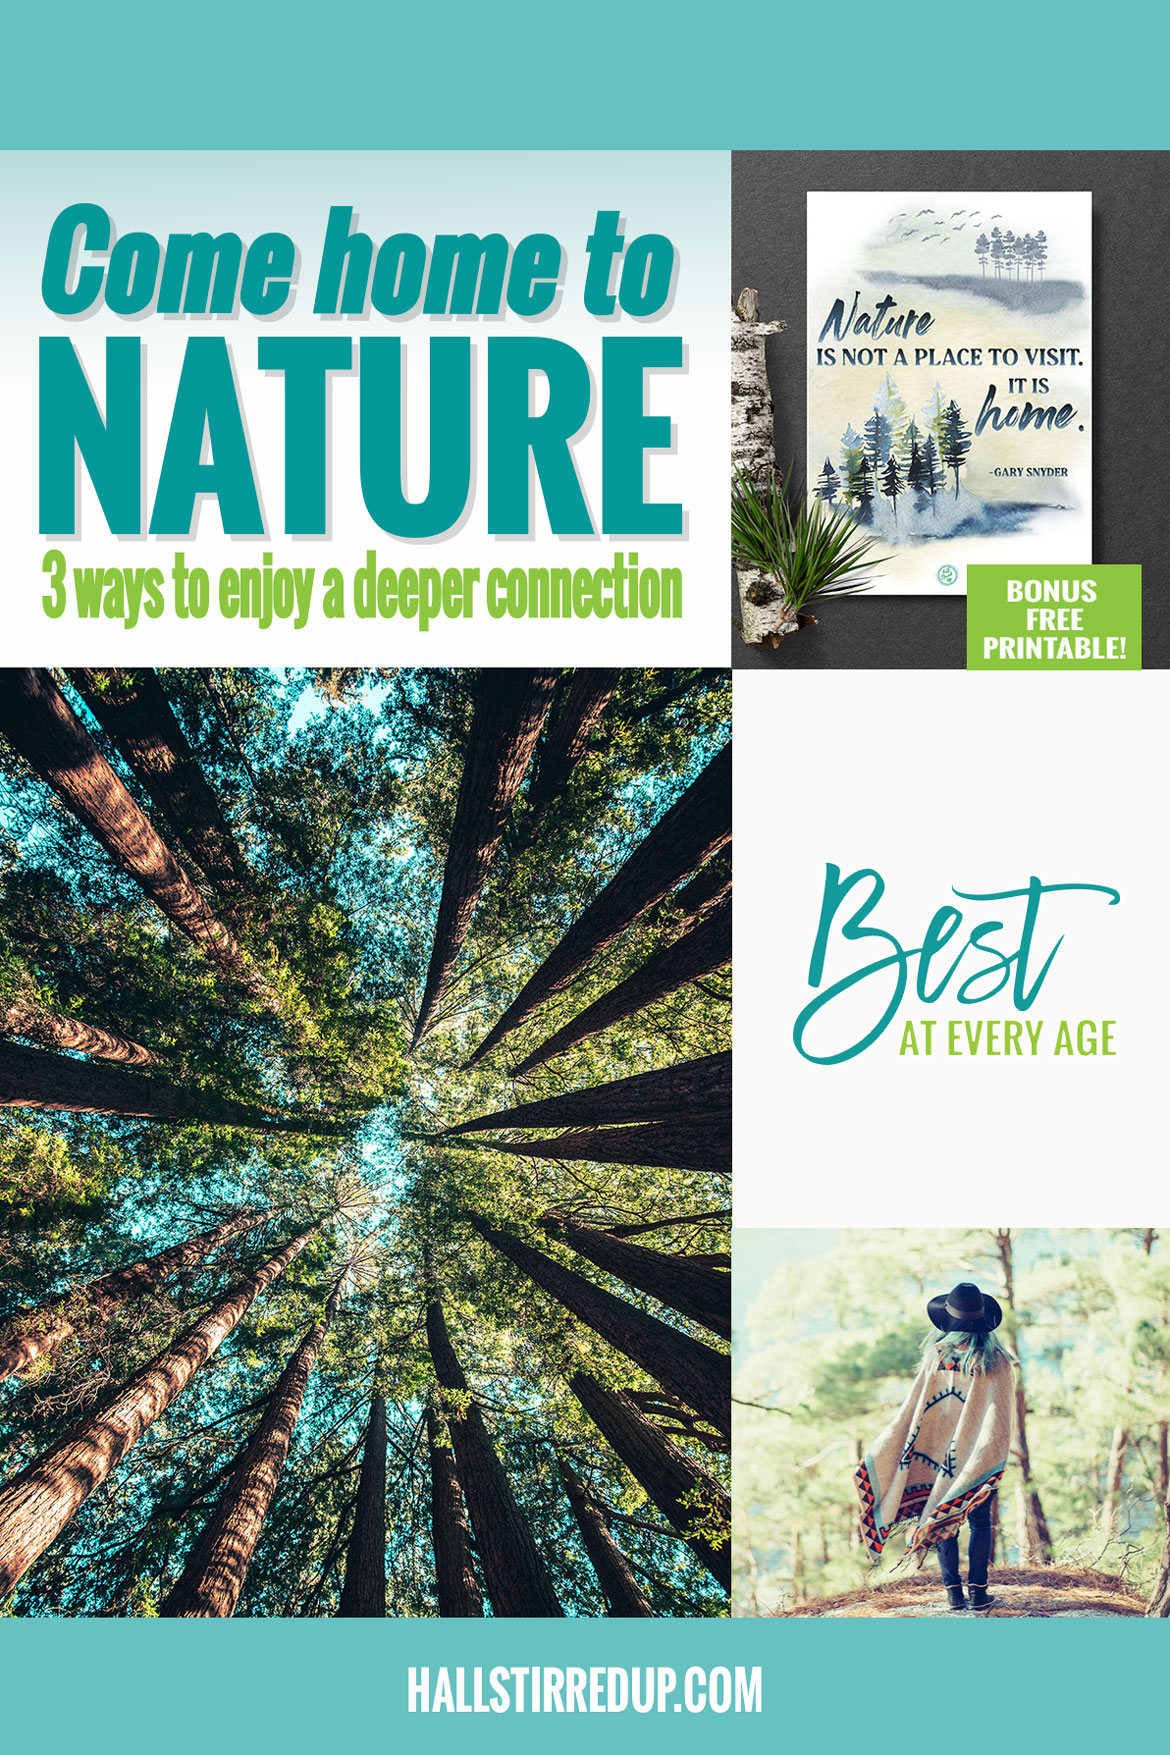 Come home to nature - Best at Every Age and a bonus free printable